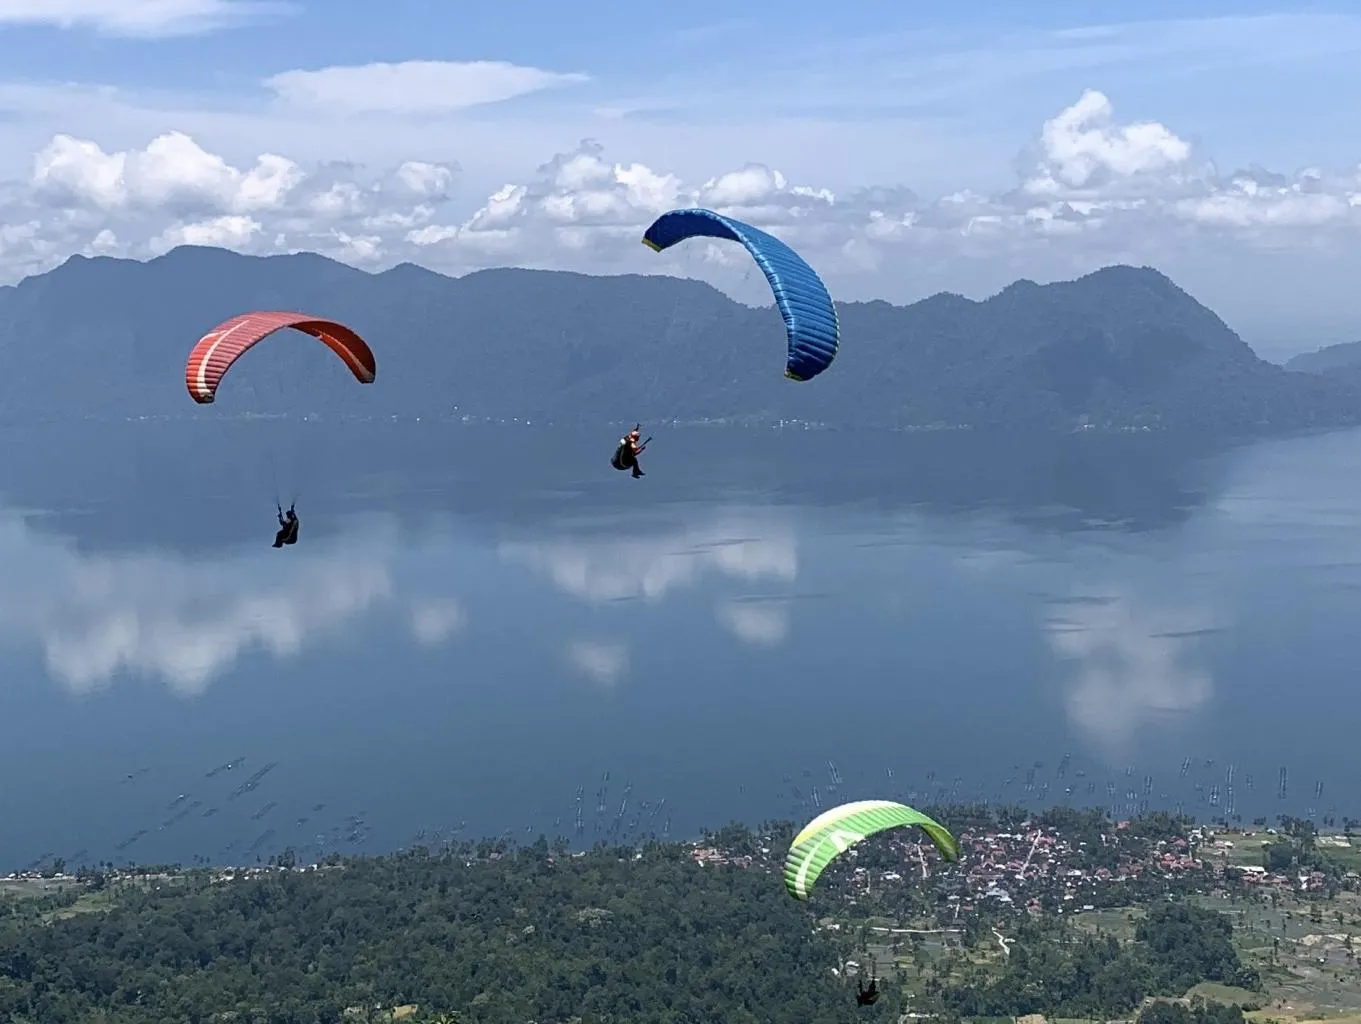 Excitement at One of The highest Paragliding Sites in Southeast Asia